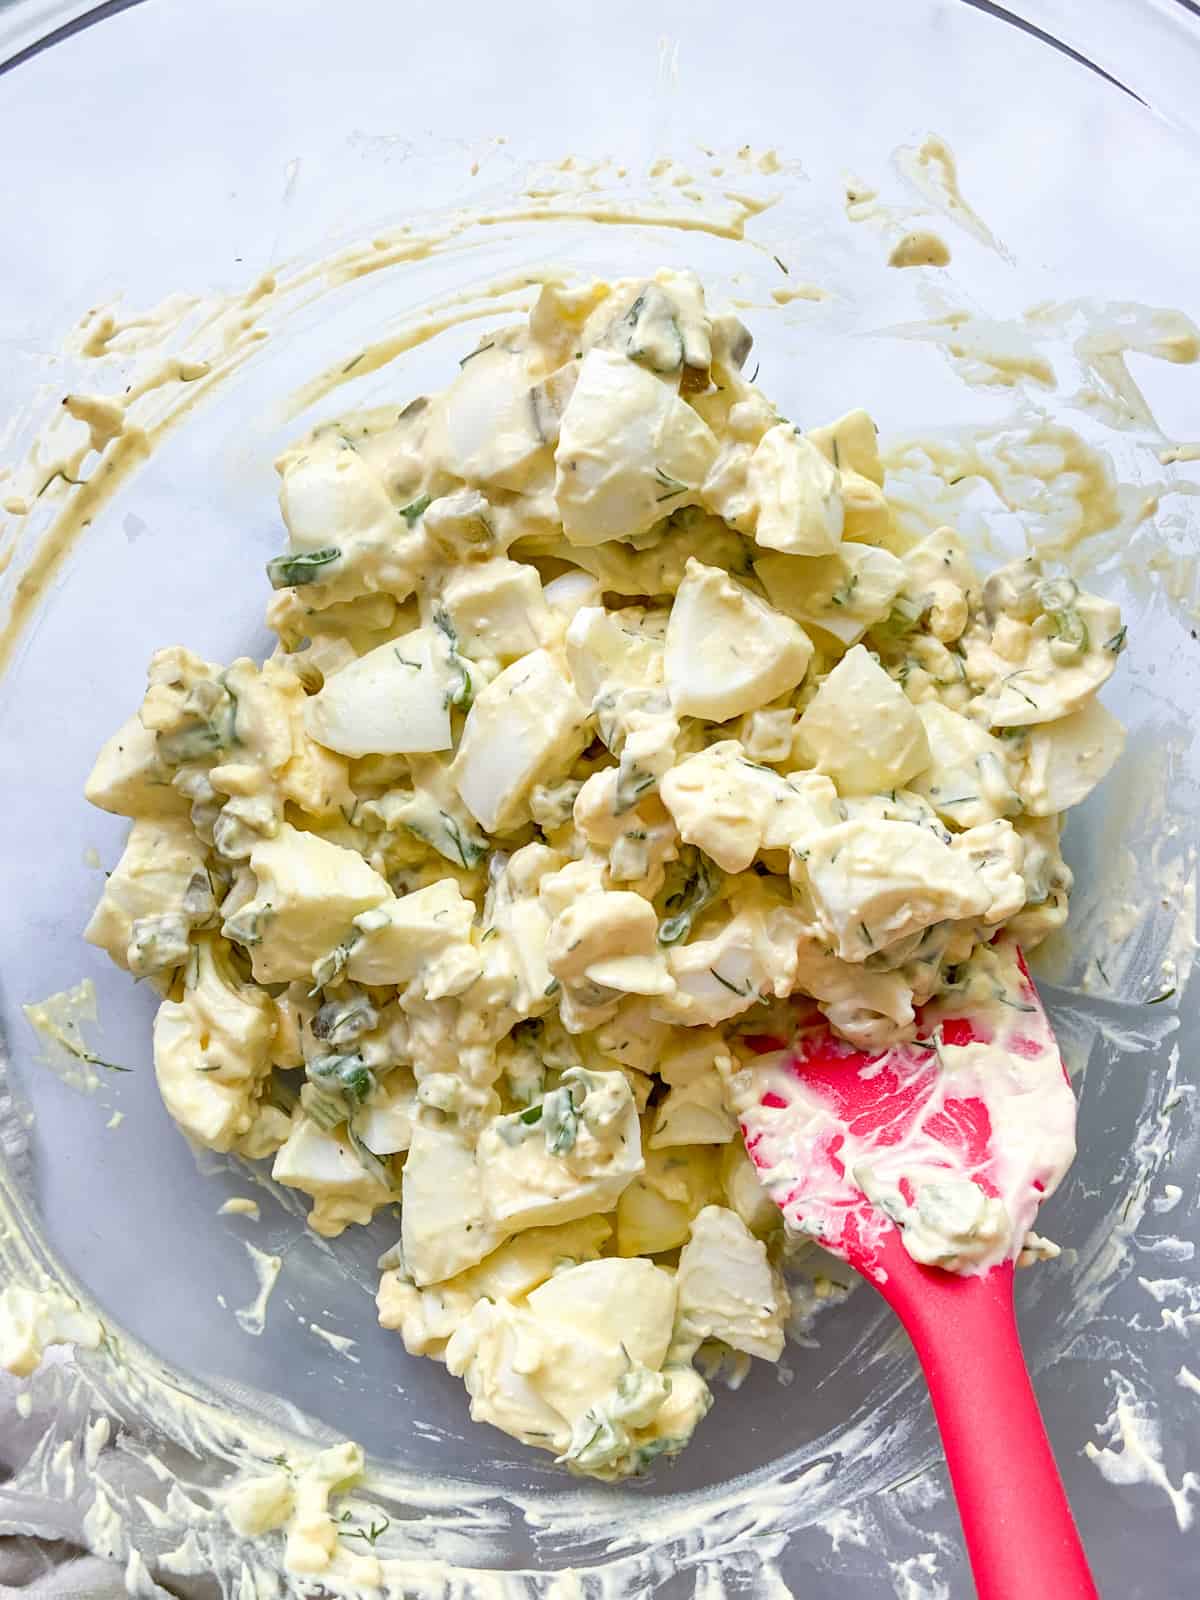 Completed egg salad in a large bowl with a spatula.